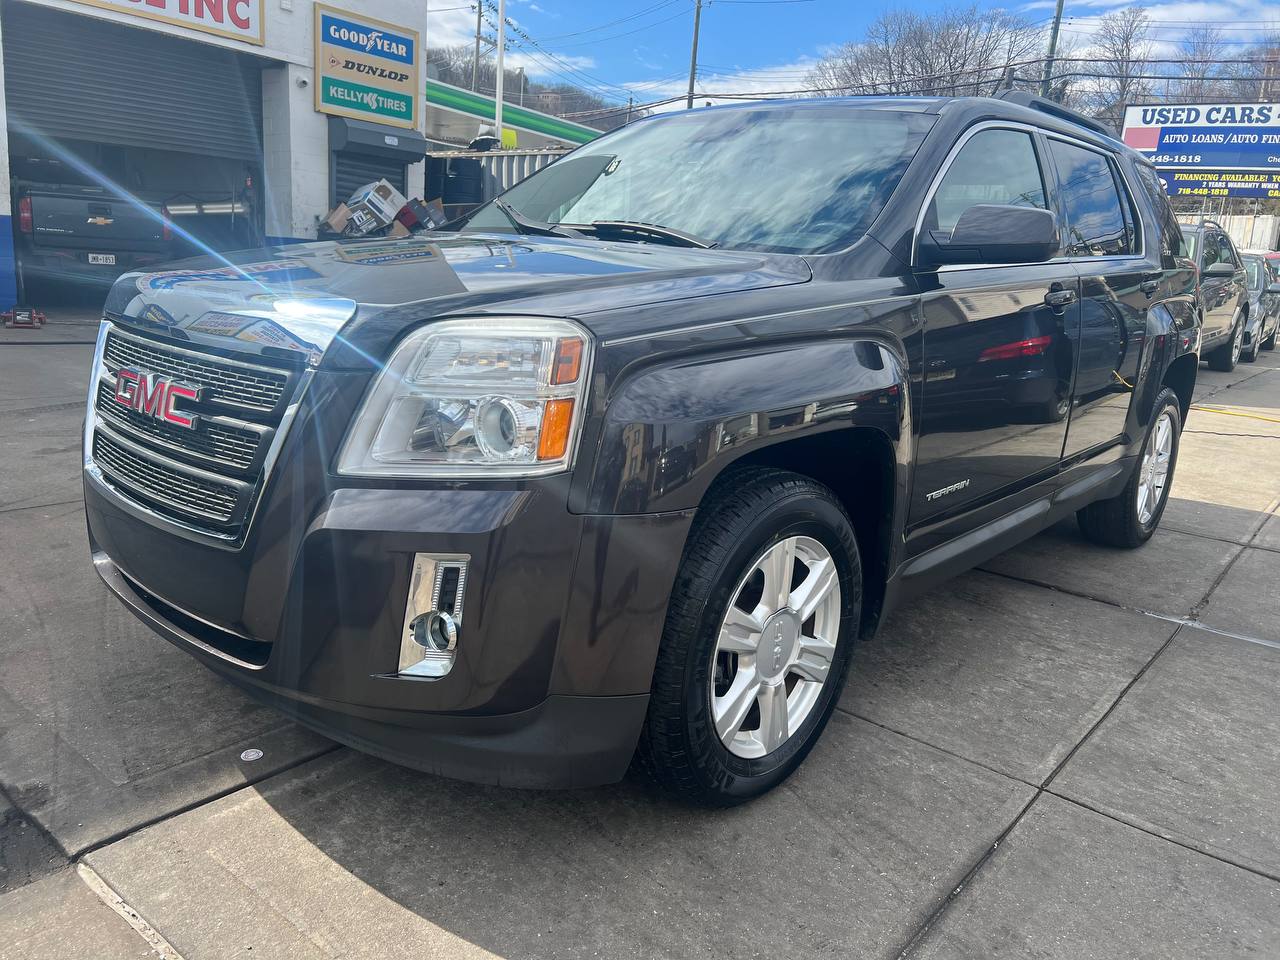 Used Car - 2015 GMC Terrain SLT for Sale in Staten Island, NY